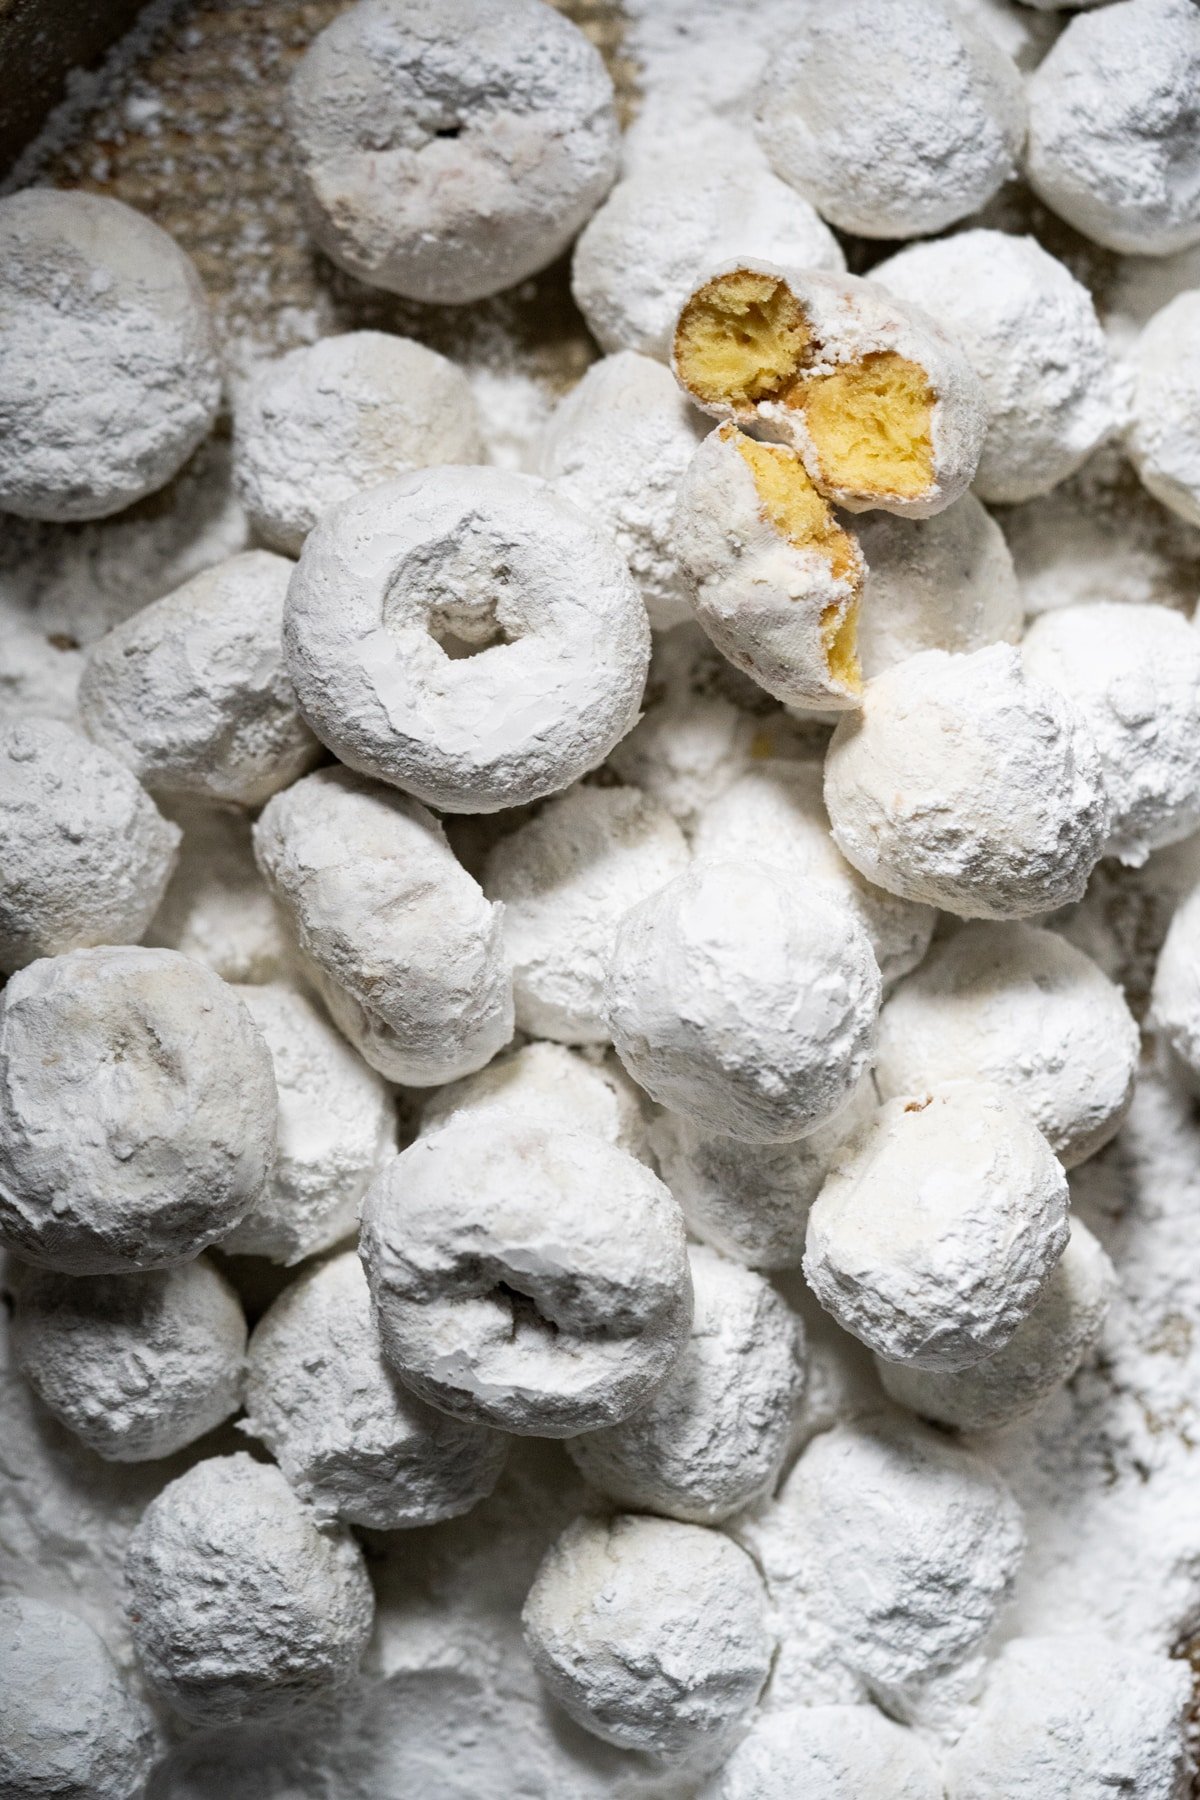 Keto powdered sugar donuts made with almond flour